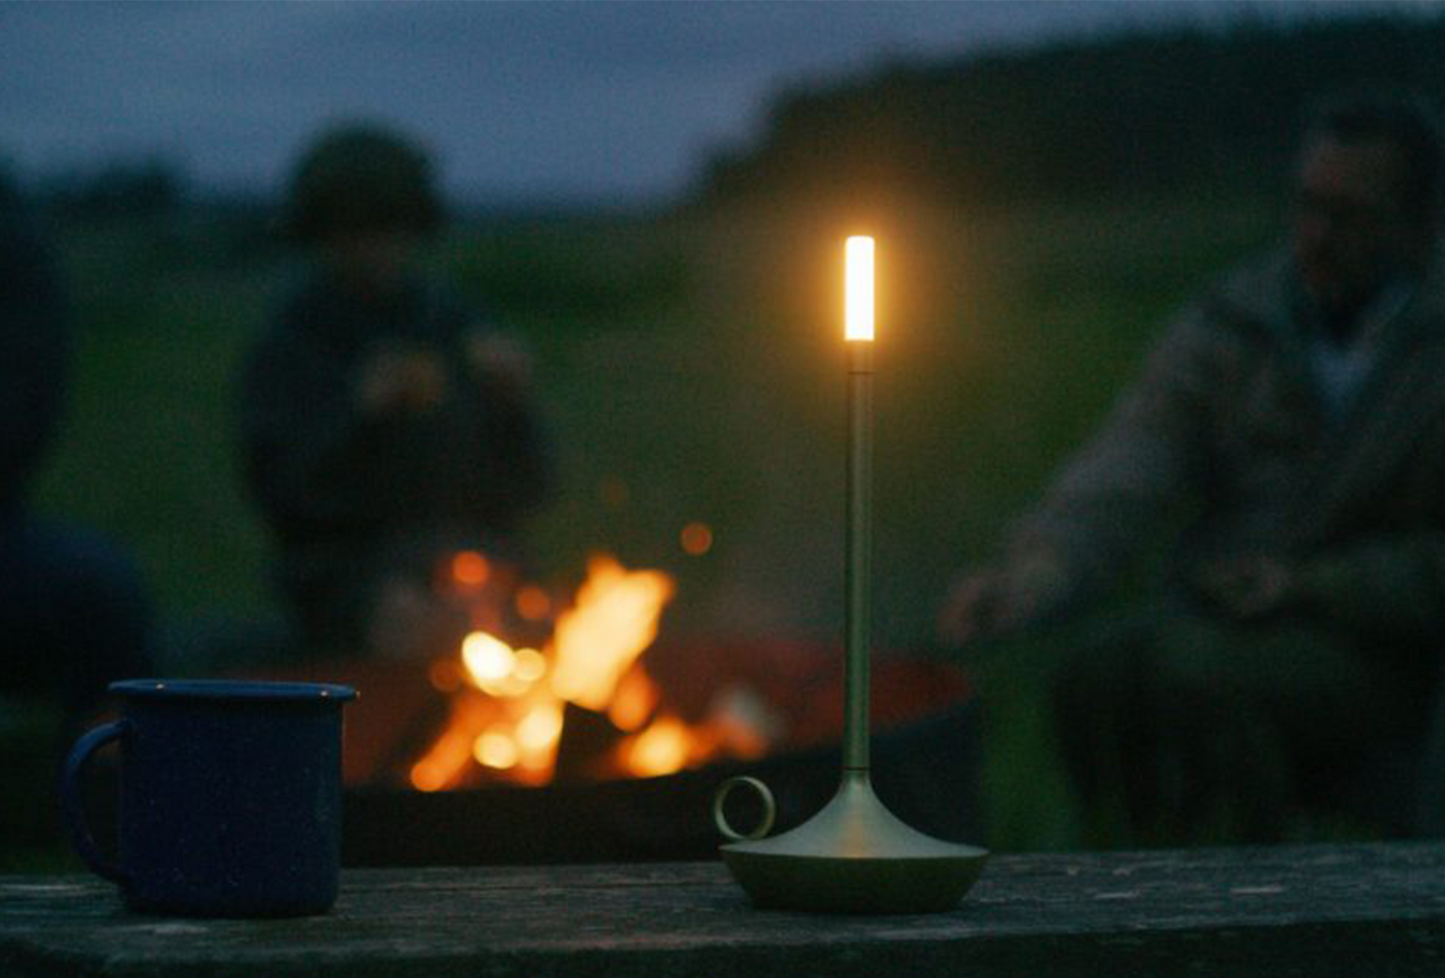 A illuminated Graphite Wick Lamp in front of a blazing fire outside on an evening night